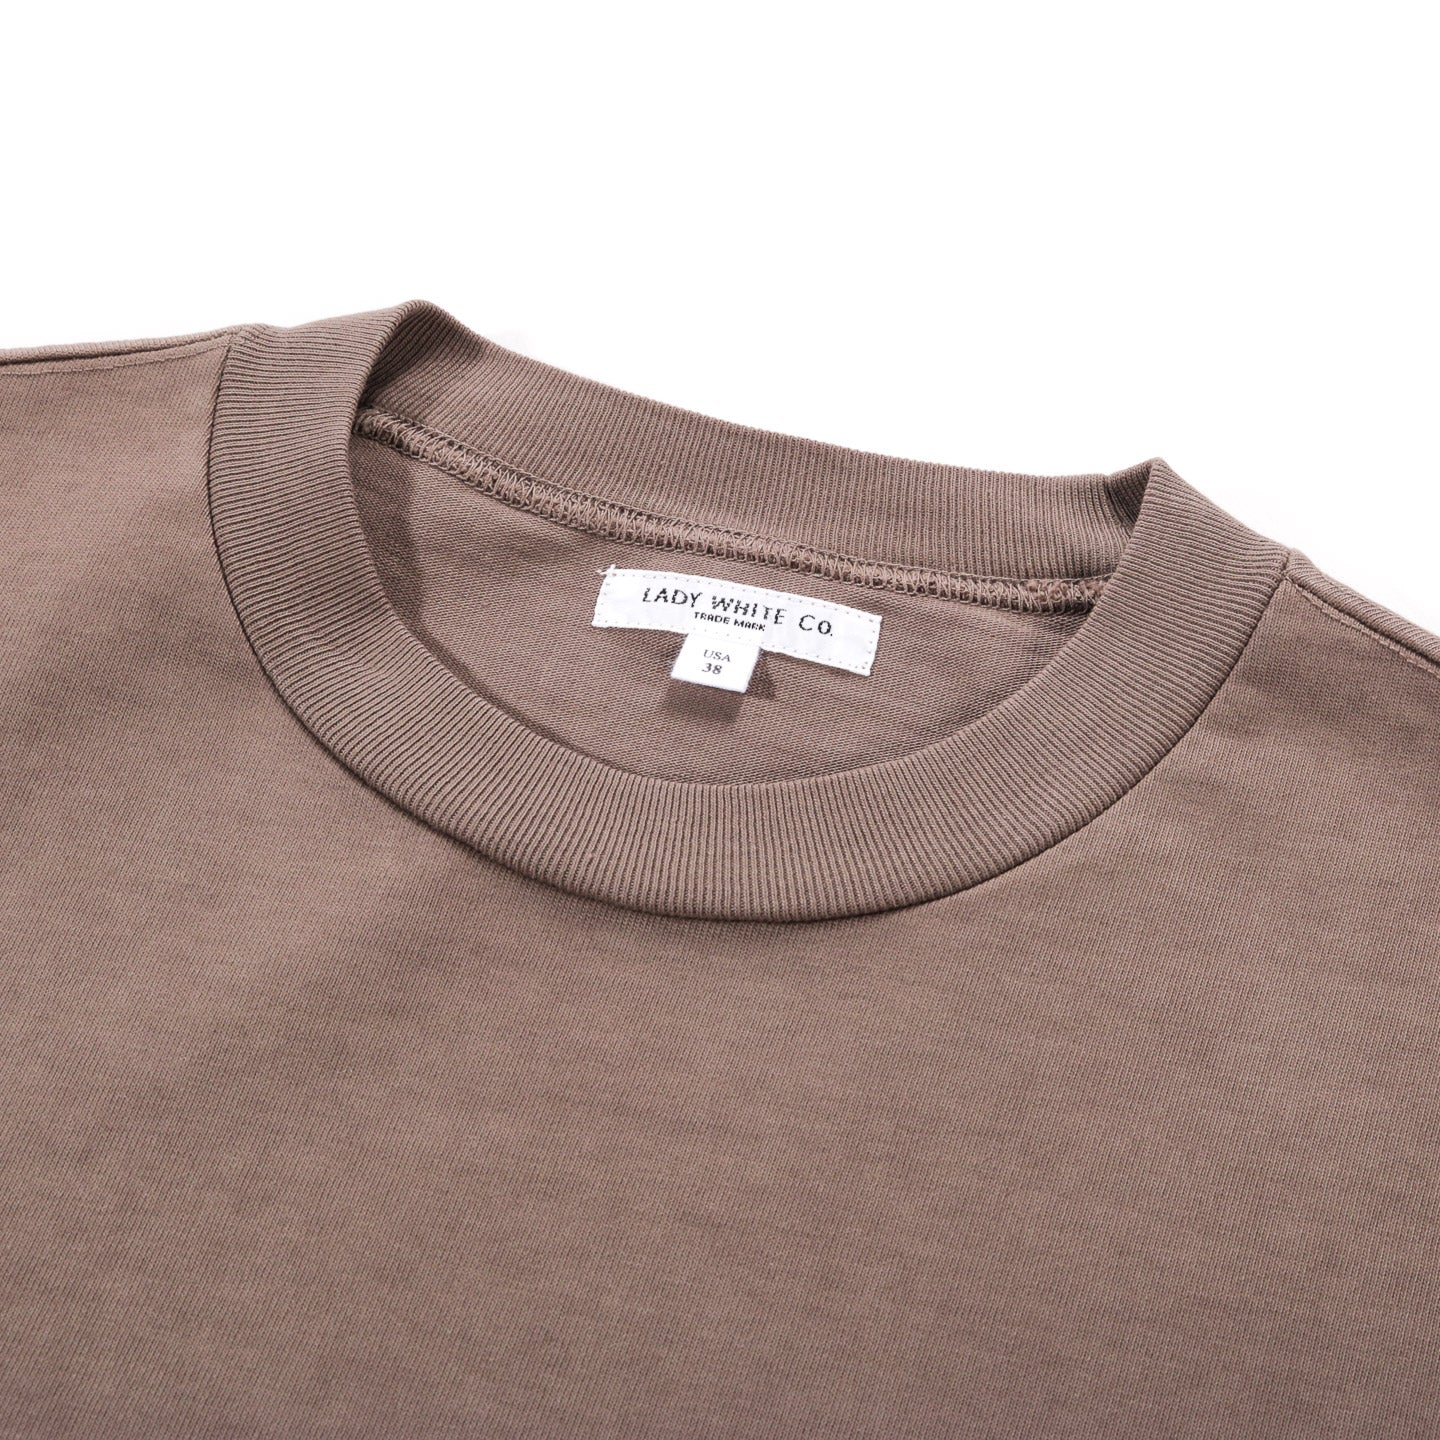 LADY WHITE CO. RUGBY T-SHIRT TAUPE